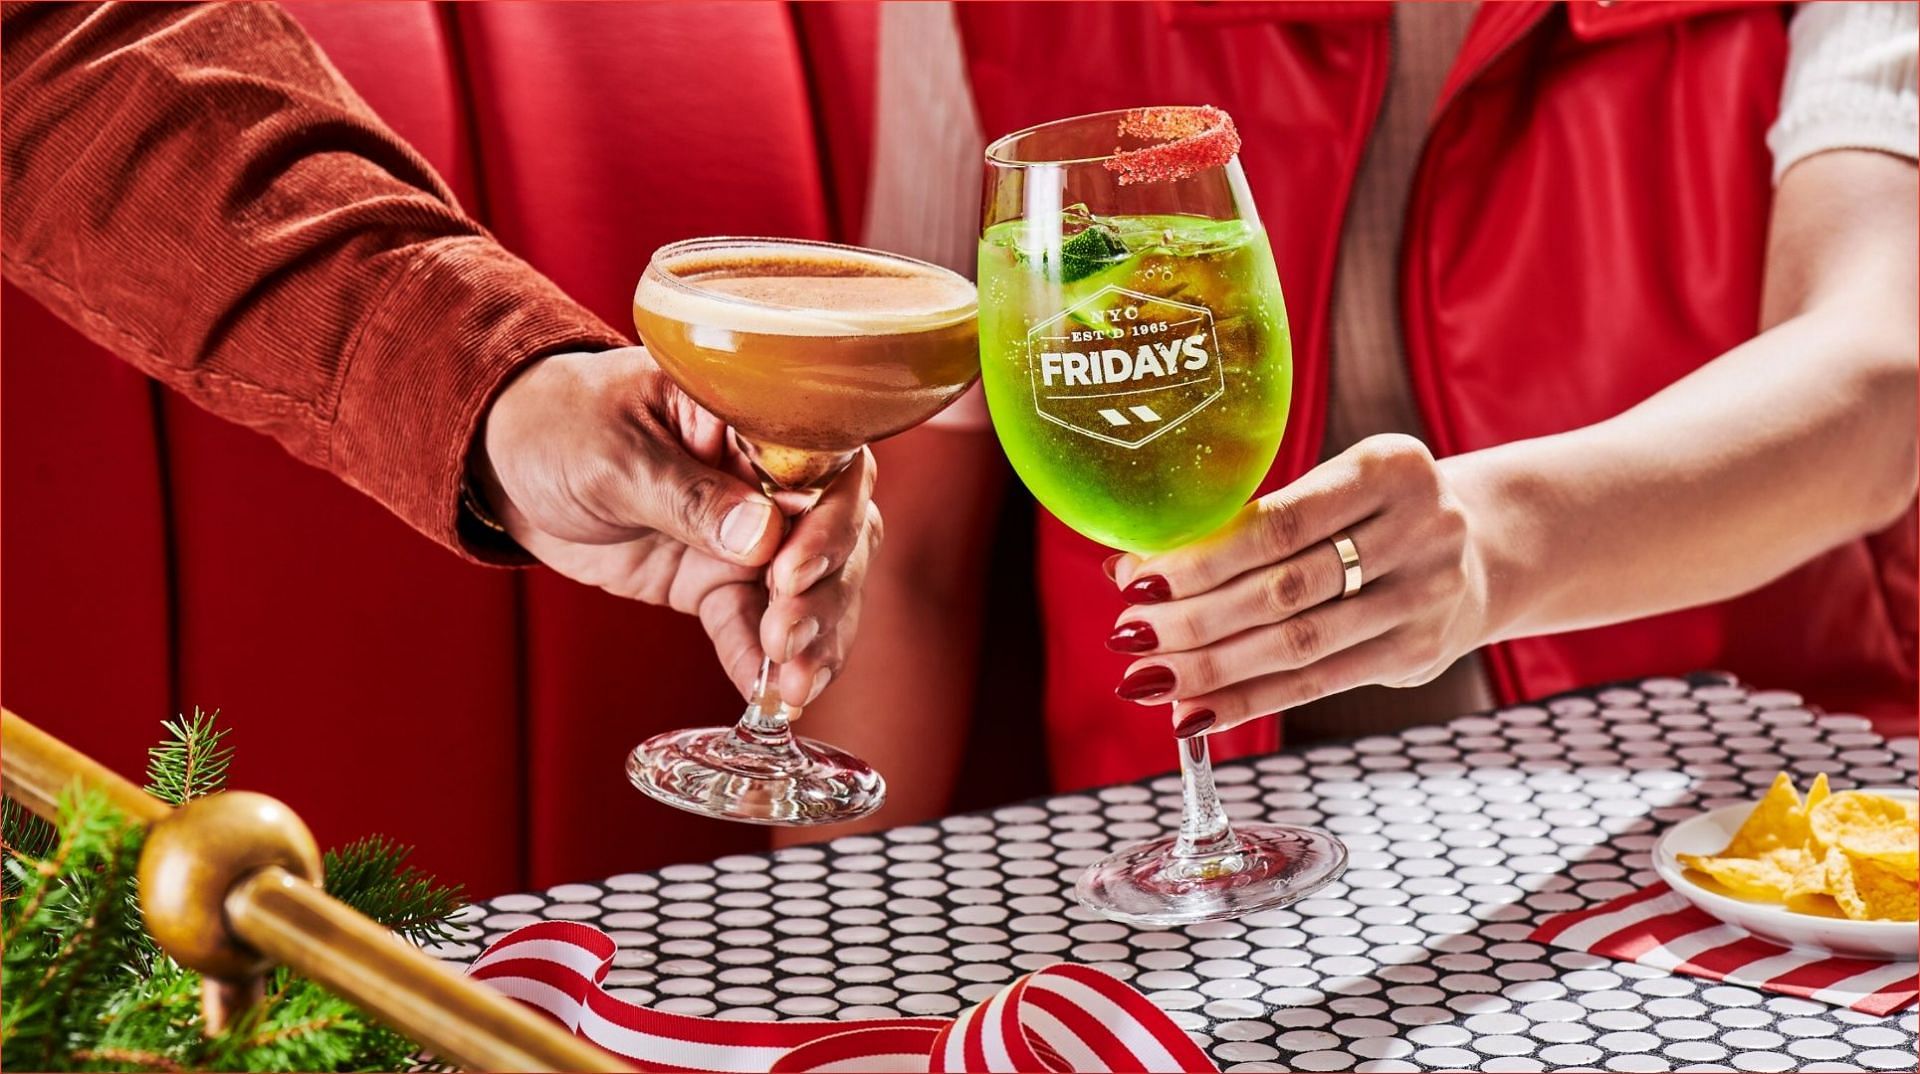 TGI Fridays introduces a new holiday cocktail menu (Image via Business Wire)